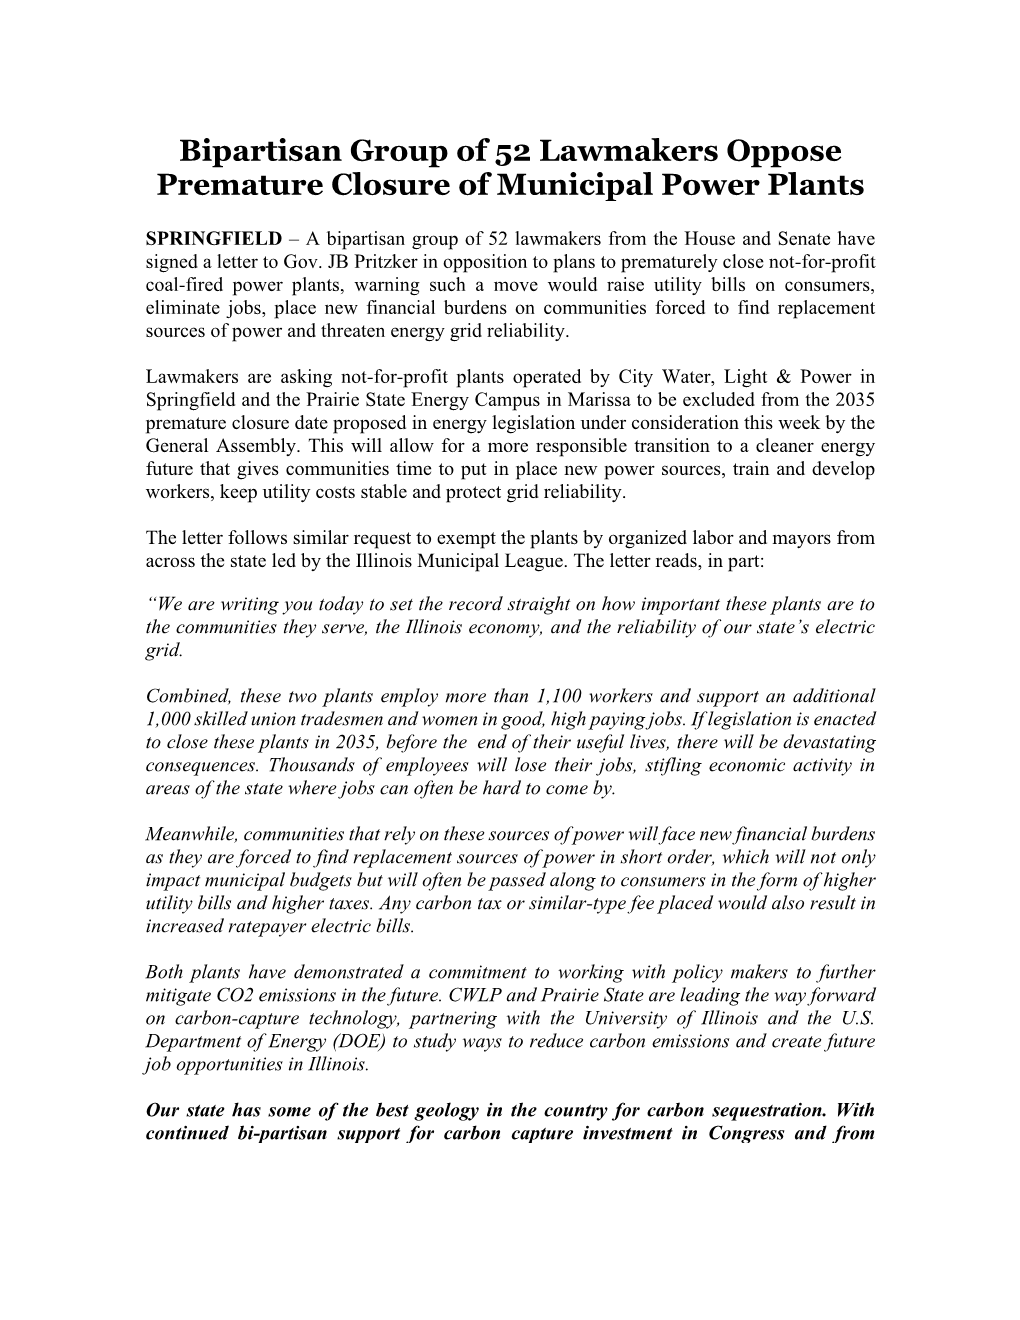 Bipartisan Group of 52 Lawmakers Oppose Premature Closure of Municipal Power Plants